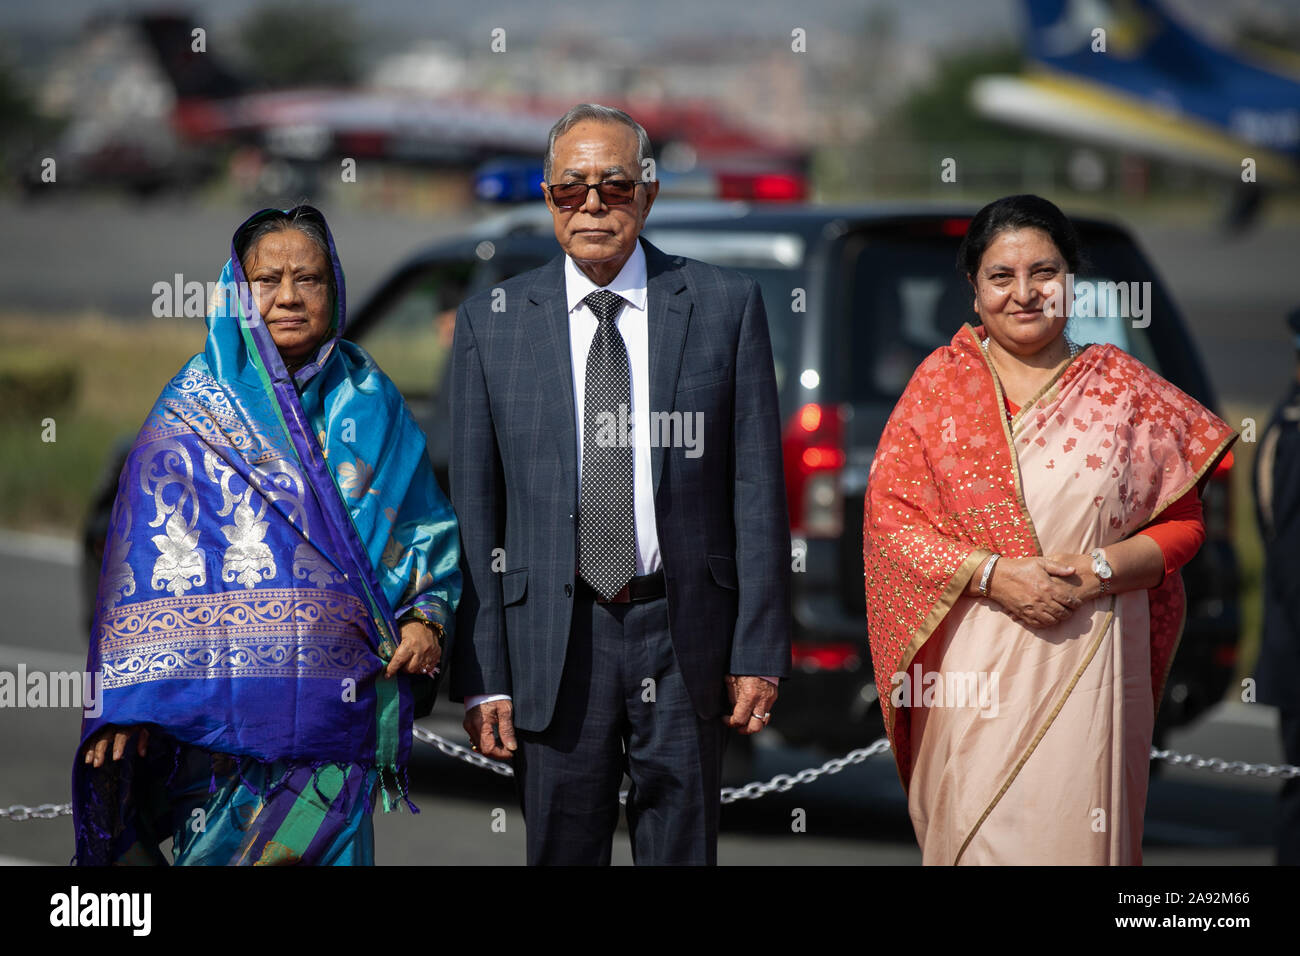 Kathmandu, Nepal. 20th Nov, 2019. President of Bangladesh, Abdul Hamid (c) and President of Nepal, Bidhya Devi Bhandari (R) and the first lady of Bangladesh Rashida Hamid (L) pose for pictures upon their arrival at Tribhuvan International Airport in Kathmandu. President of Bangladesh is on a three-day official goodwill visit to Nepal at the invitation of Nepal's President. Credit: SOPA Images Limited/Alamy Live News Stock Photo